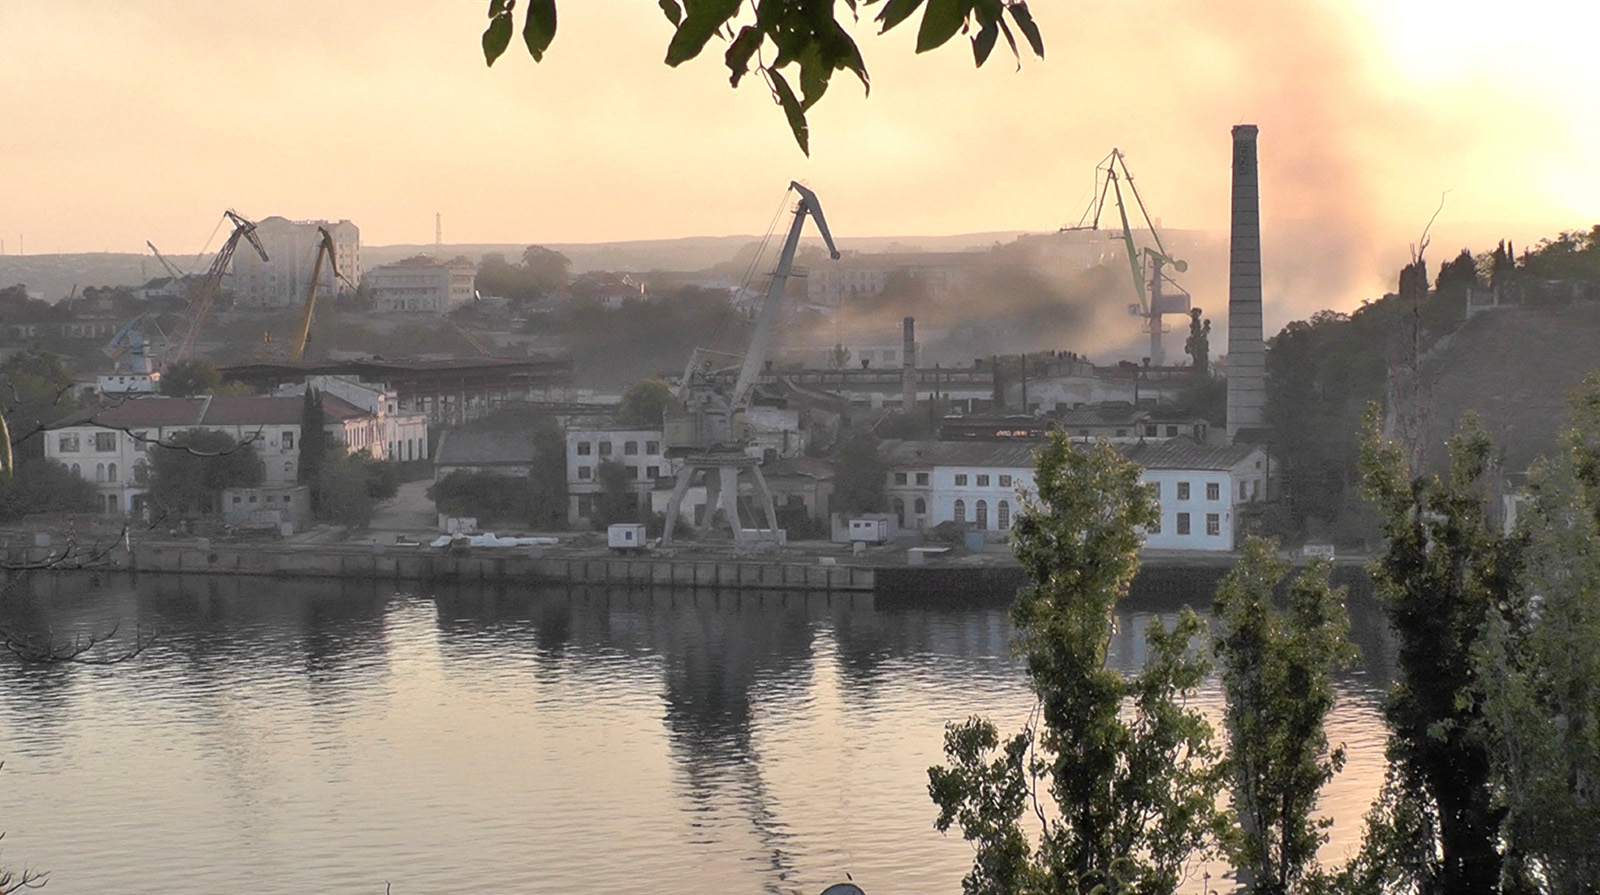 Smoke rises from the shipyard that was reportedly hit by Ukrainian missile attack in Sevastopol, Crimea, in this still image from video taken on September 13.